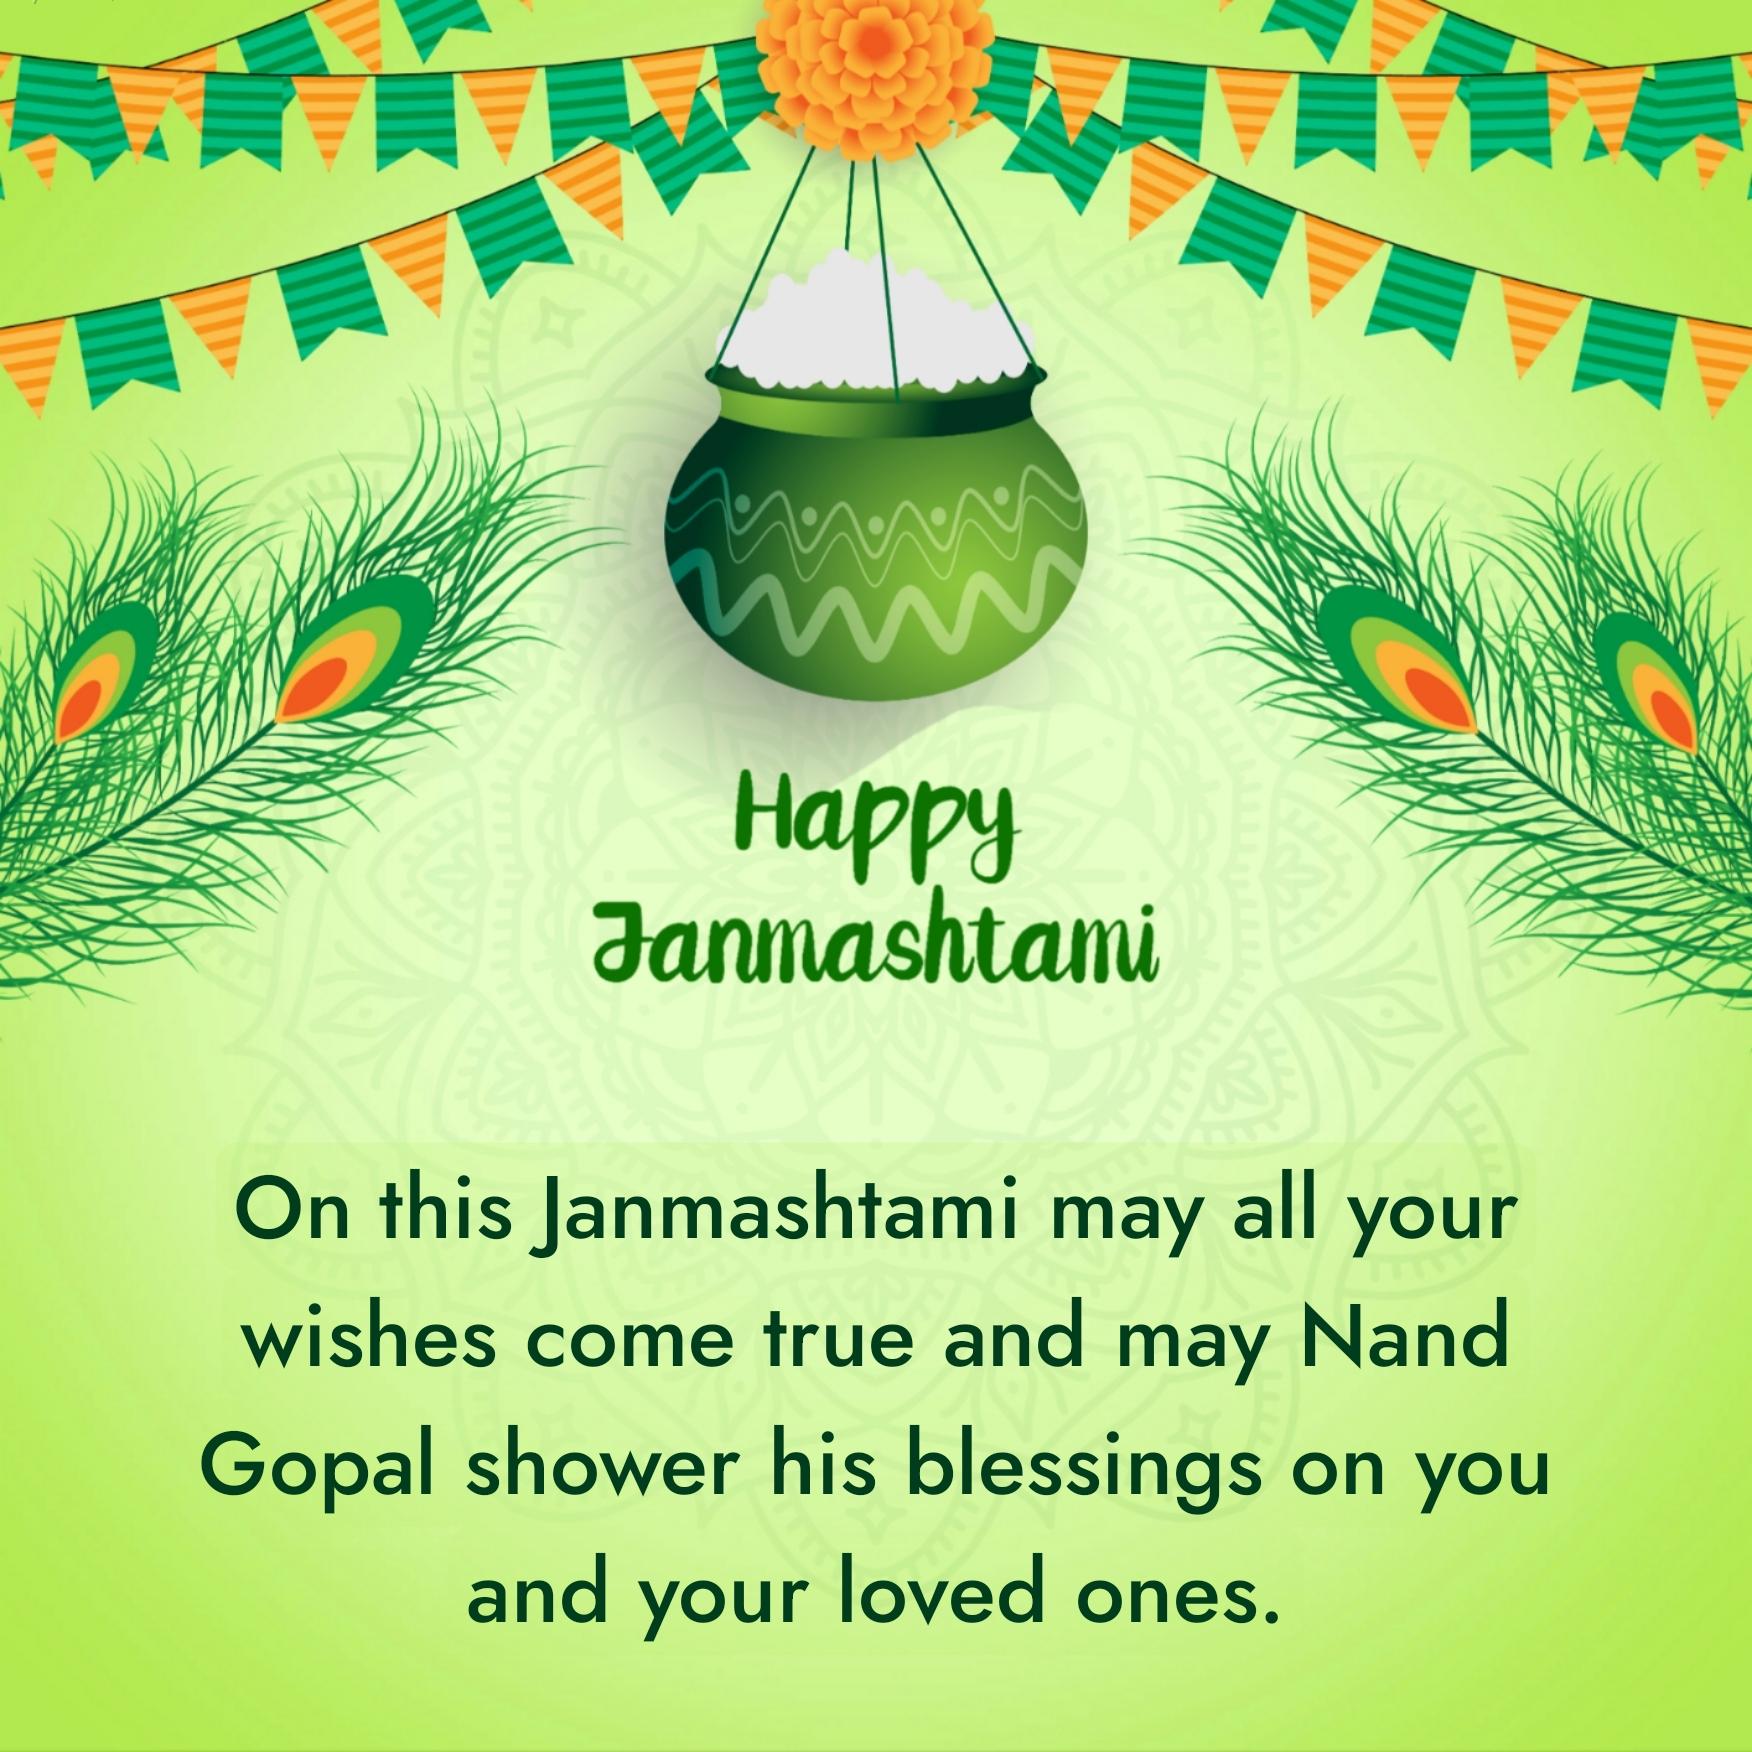 On this Janmashtami may all your wishes come true